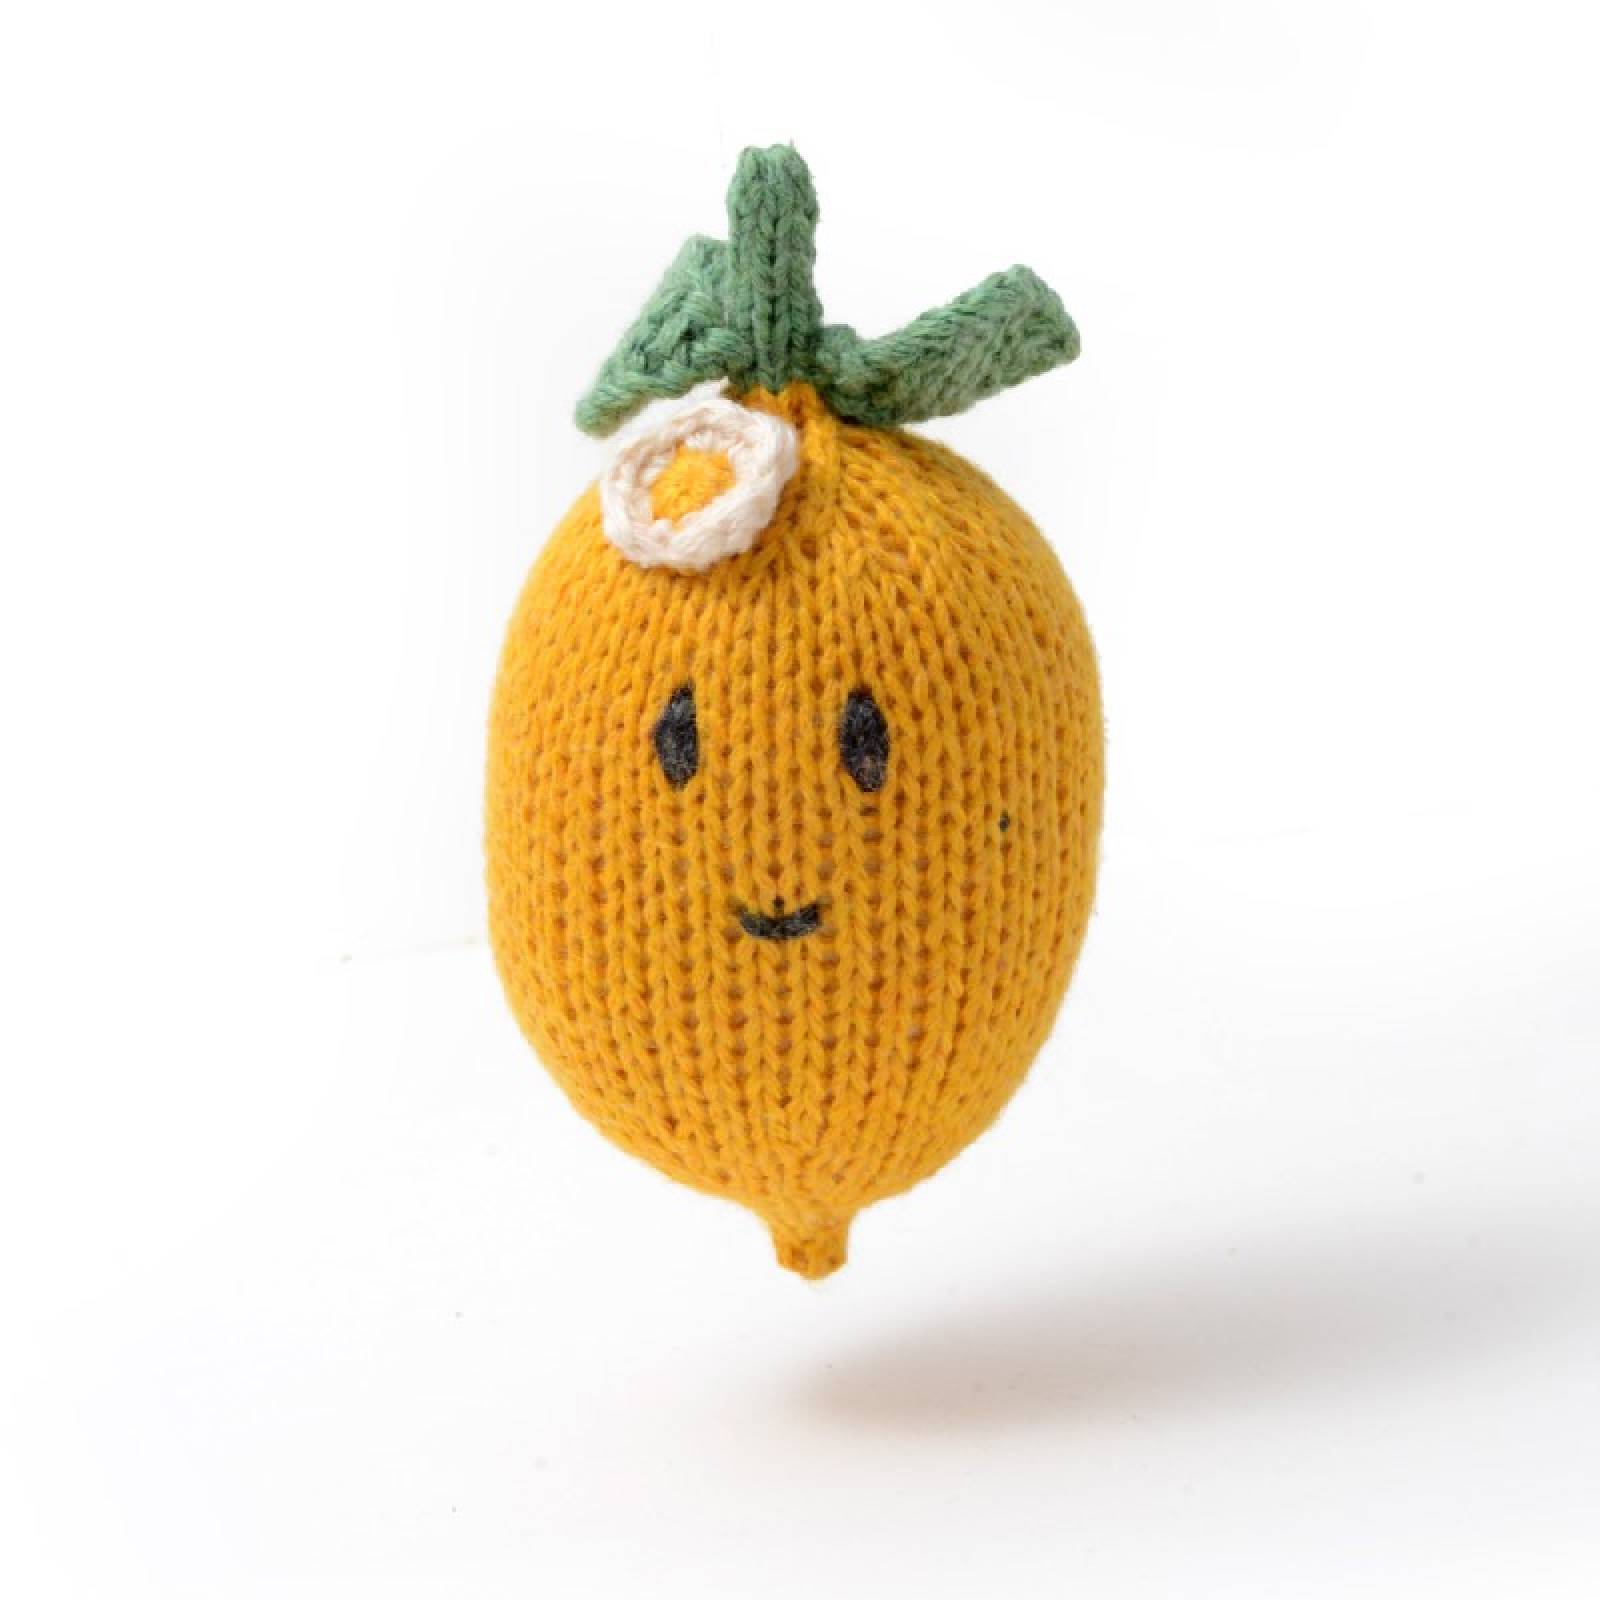 Lemon - Hand Knitted Soft Toy Rattle Organic Cotton